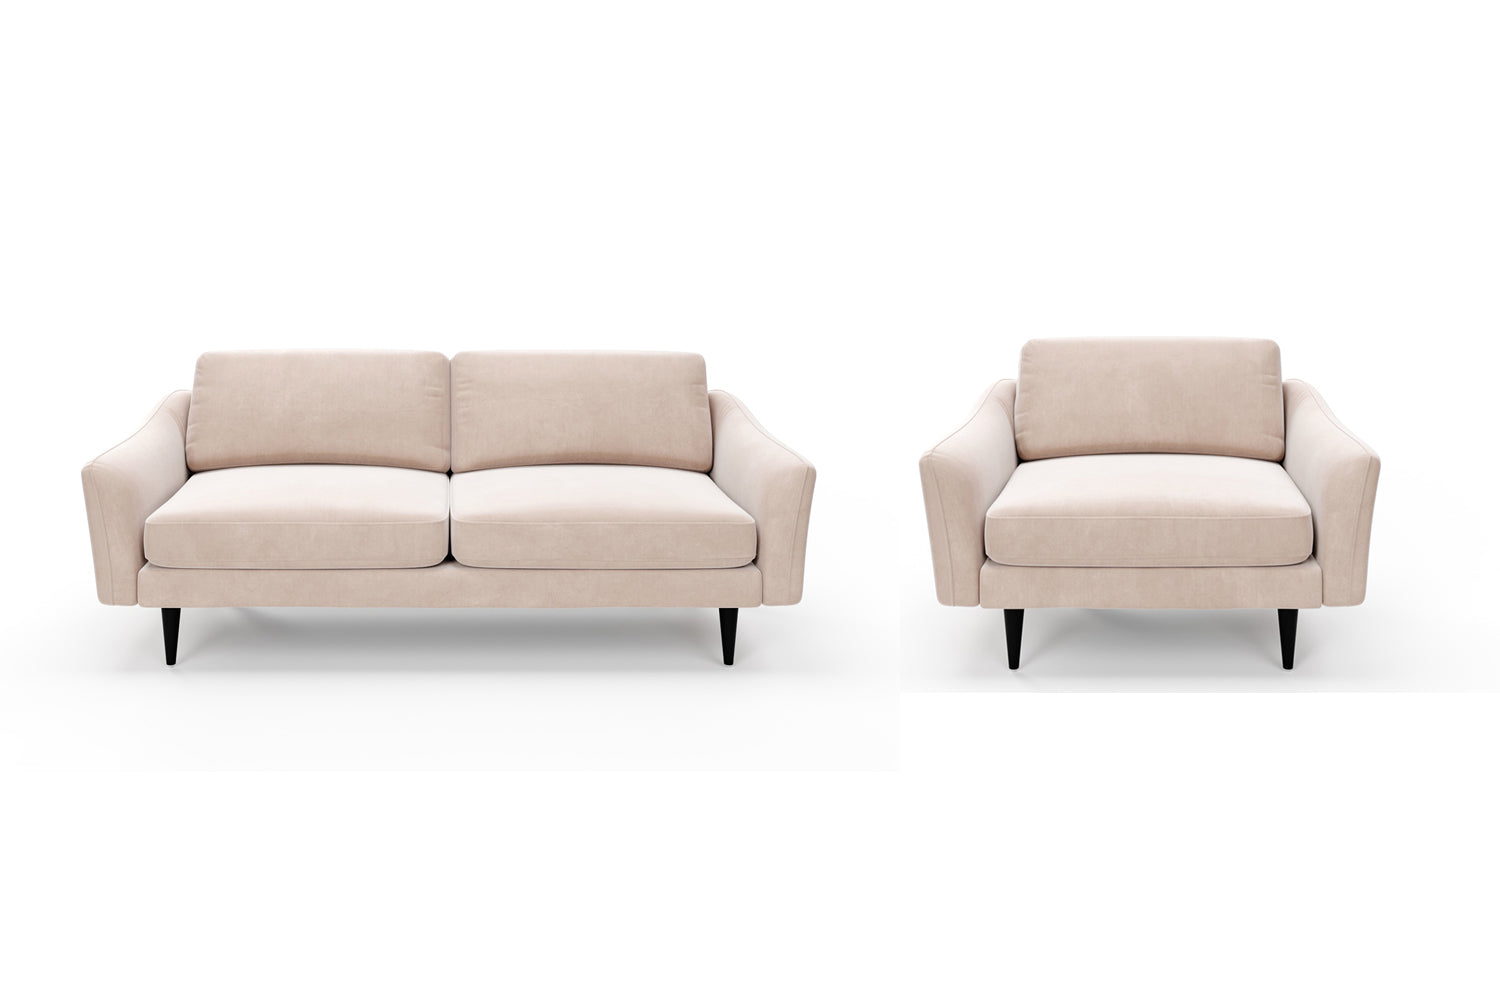 The Rebel - 3 Seater Sofa and 1.5 Seater Snuggler Set - Taupe